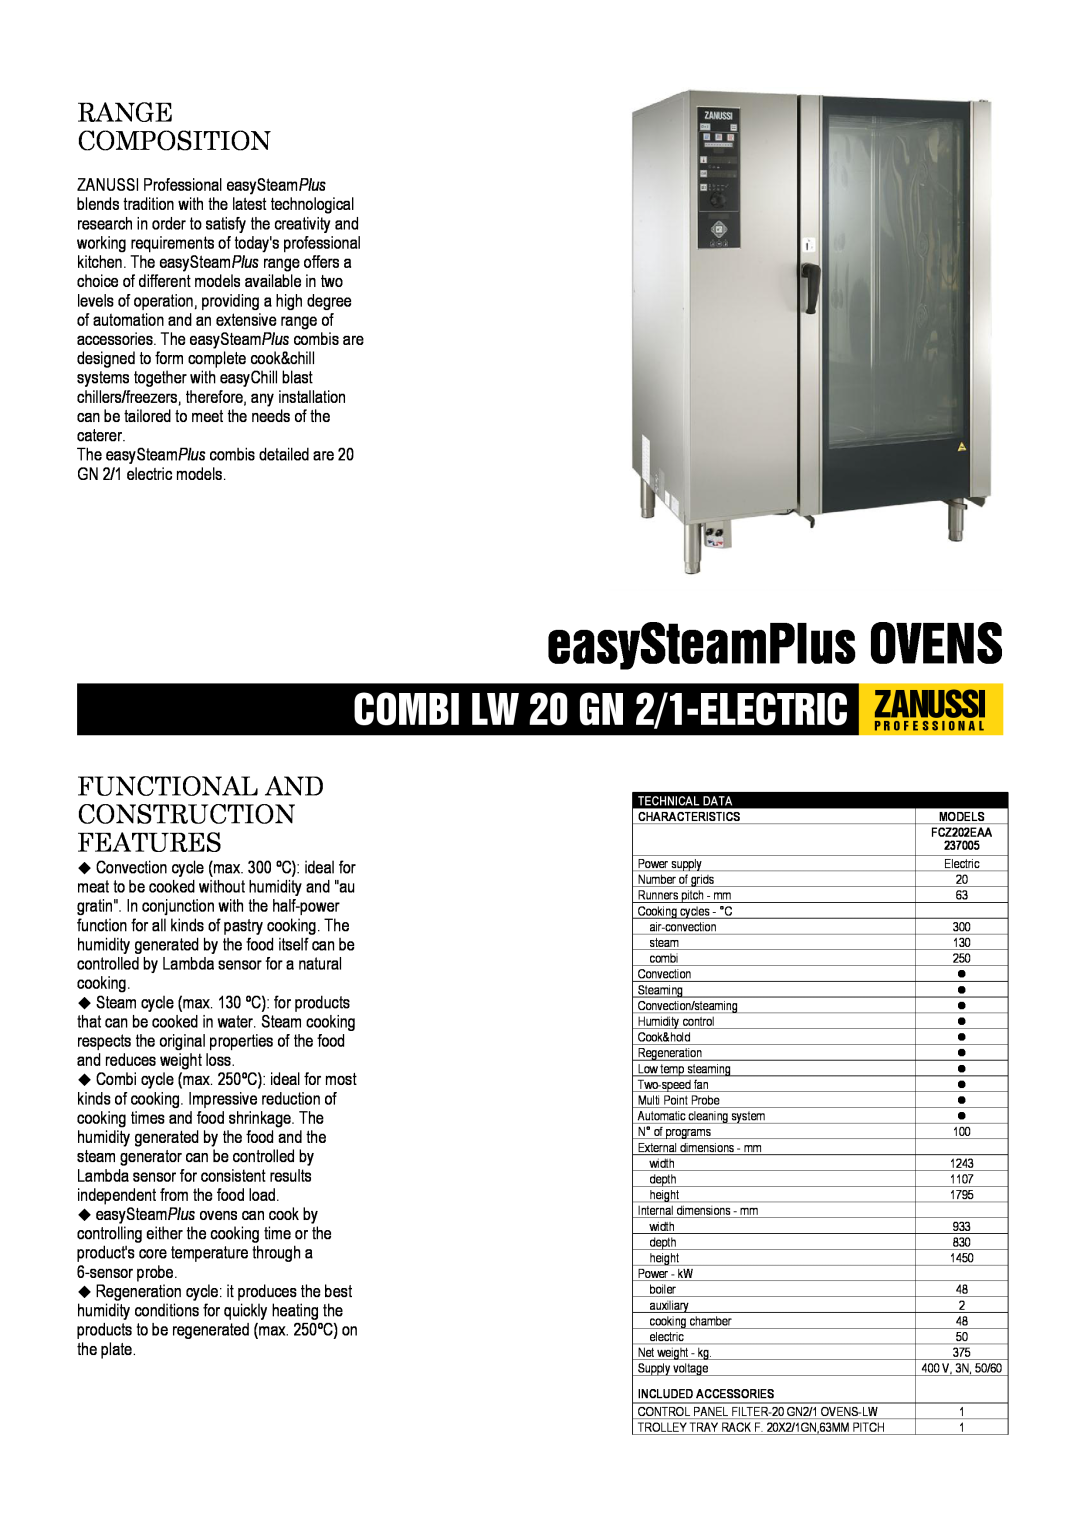 Zanussi 237005, FCZ202EAA dimensions easySteamPlus OVENS, Range Composition, Functional And Construction Features 